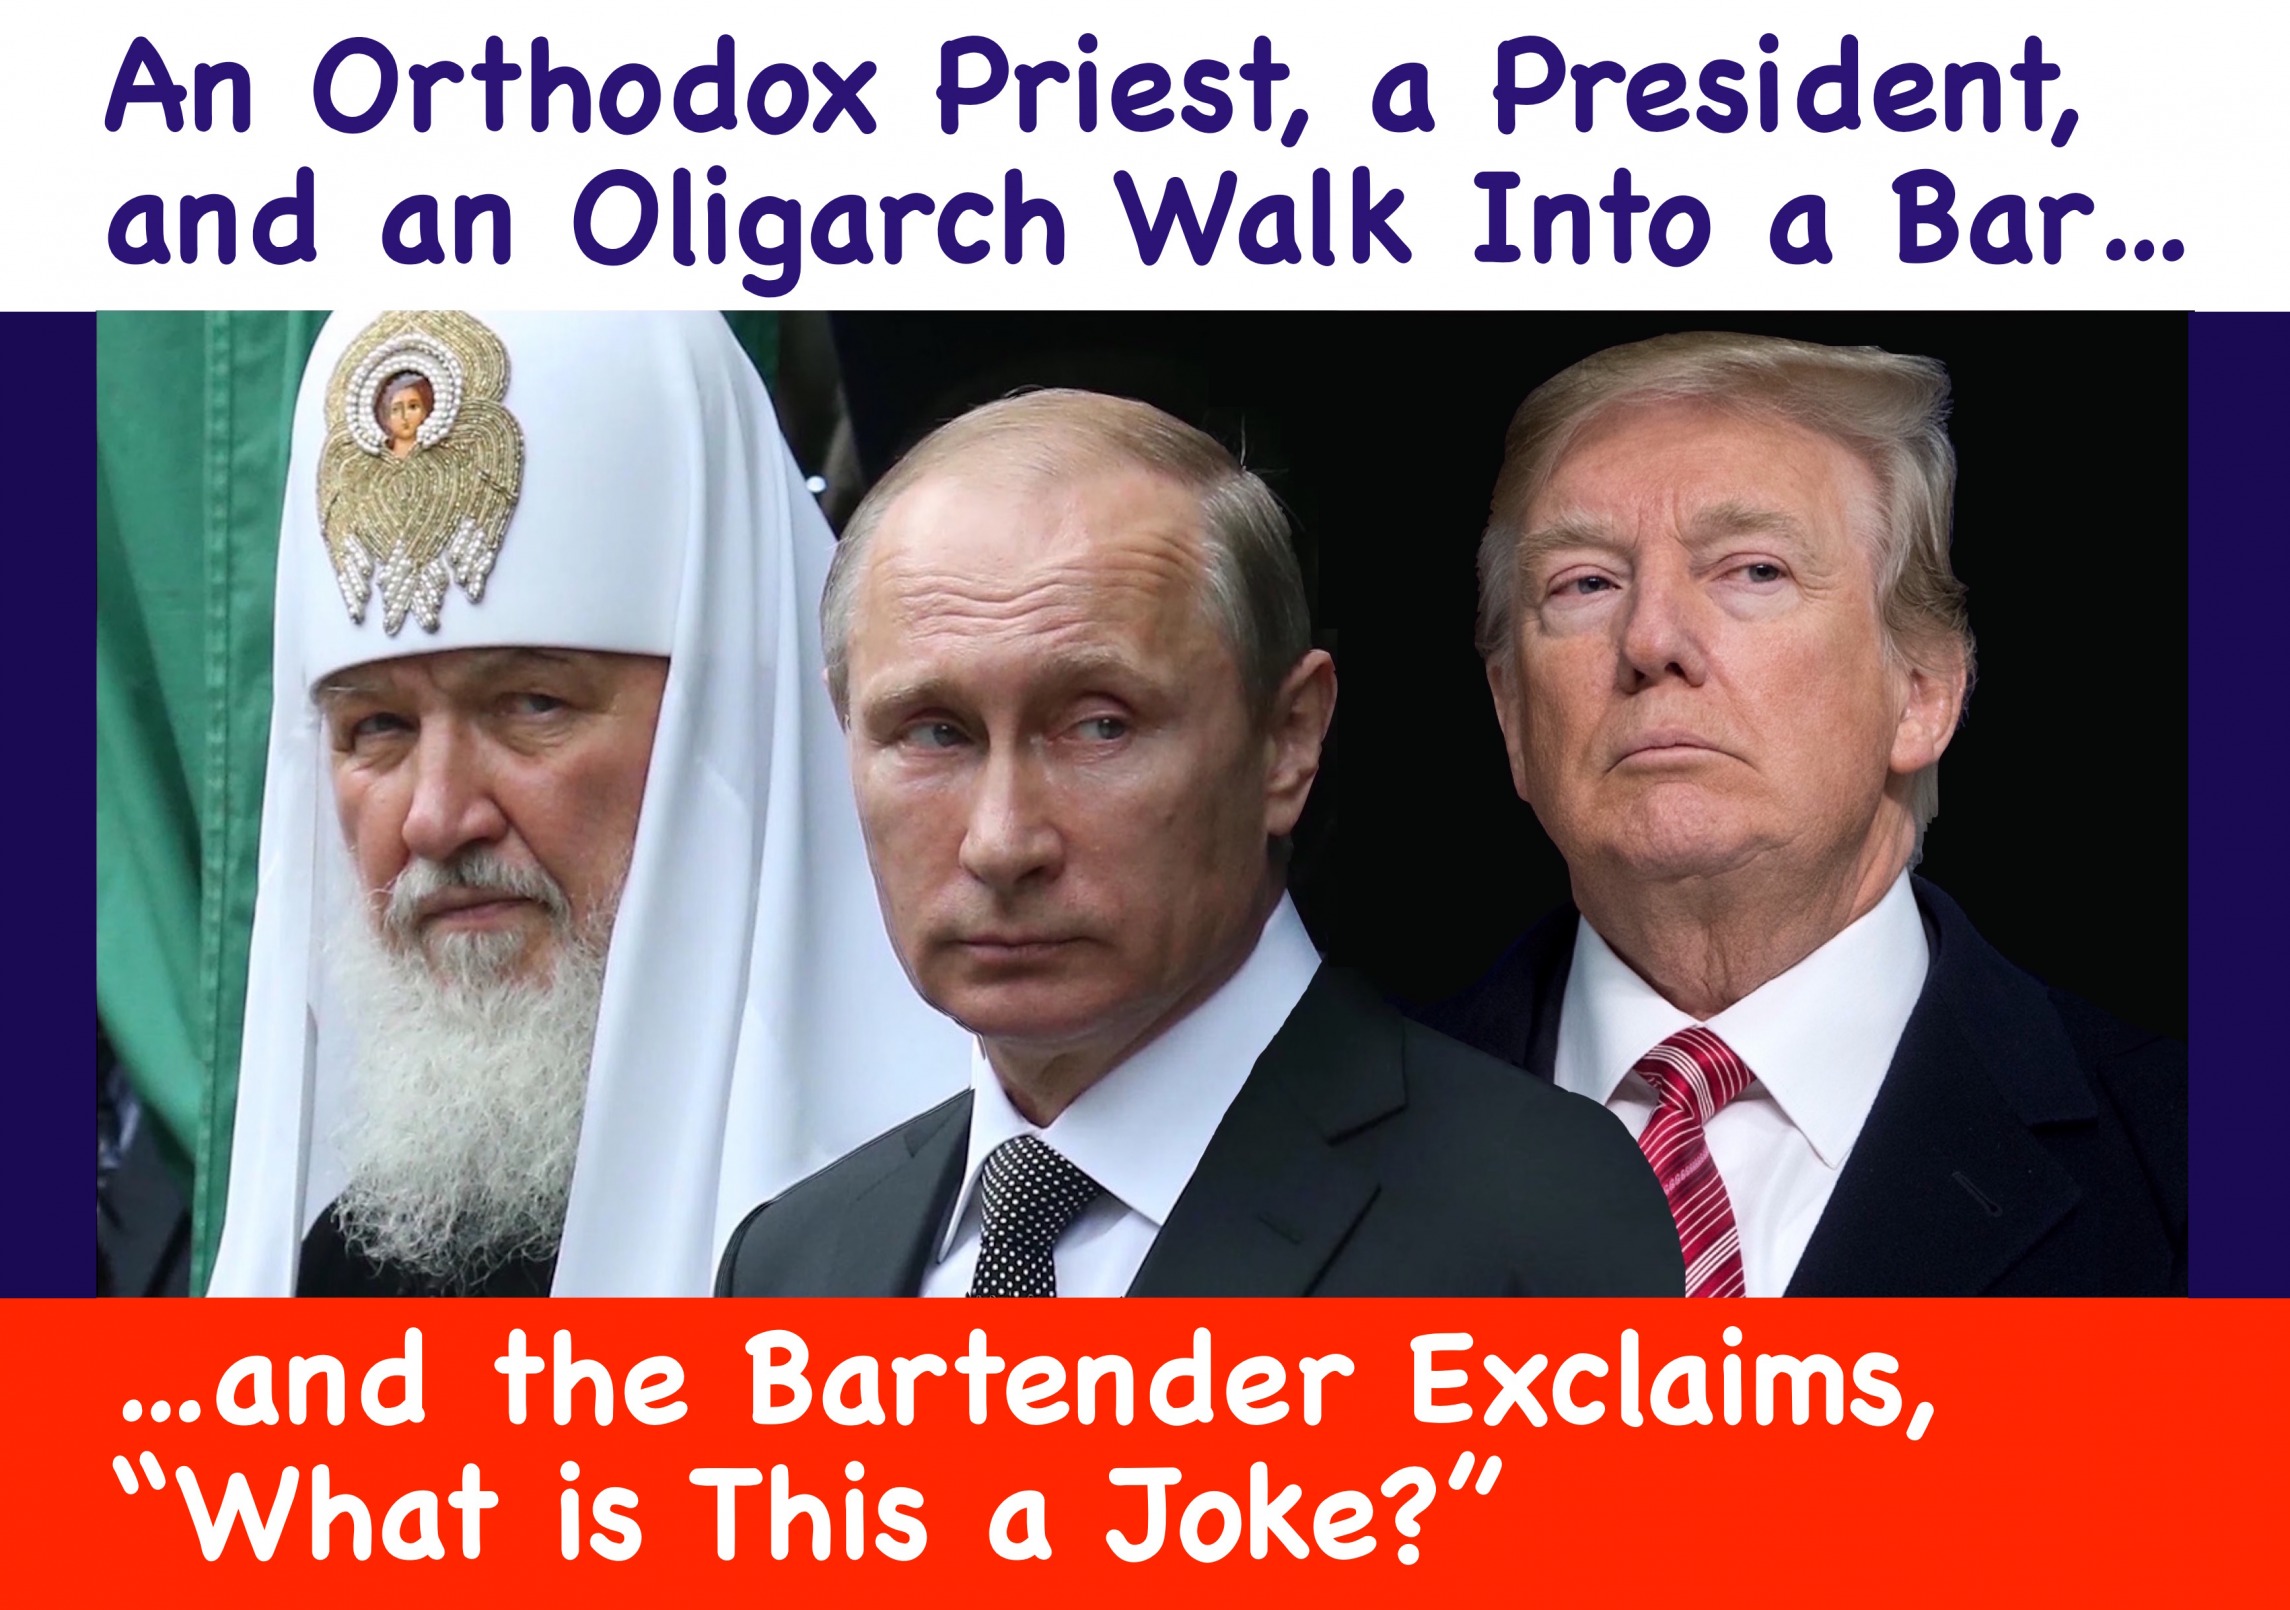 An Orthodox Priest a President and an Oligarch Walk Into a Bar Blank Meme Template